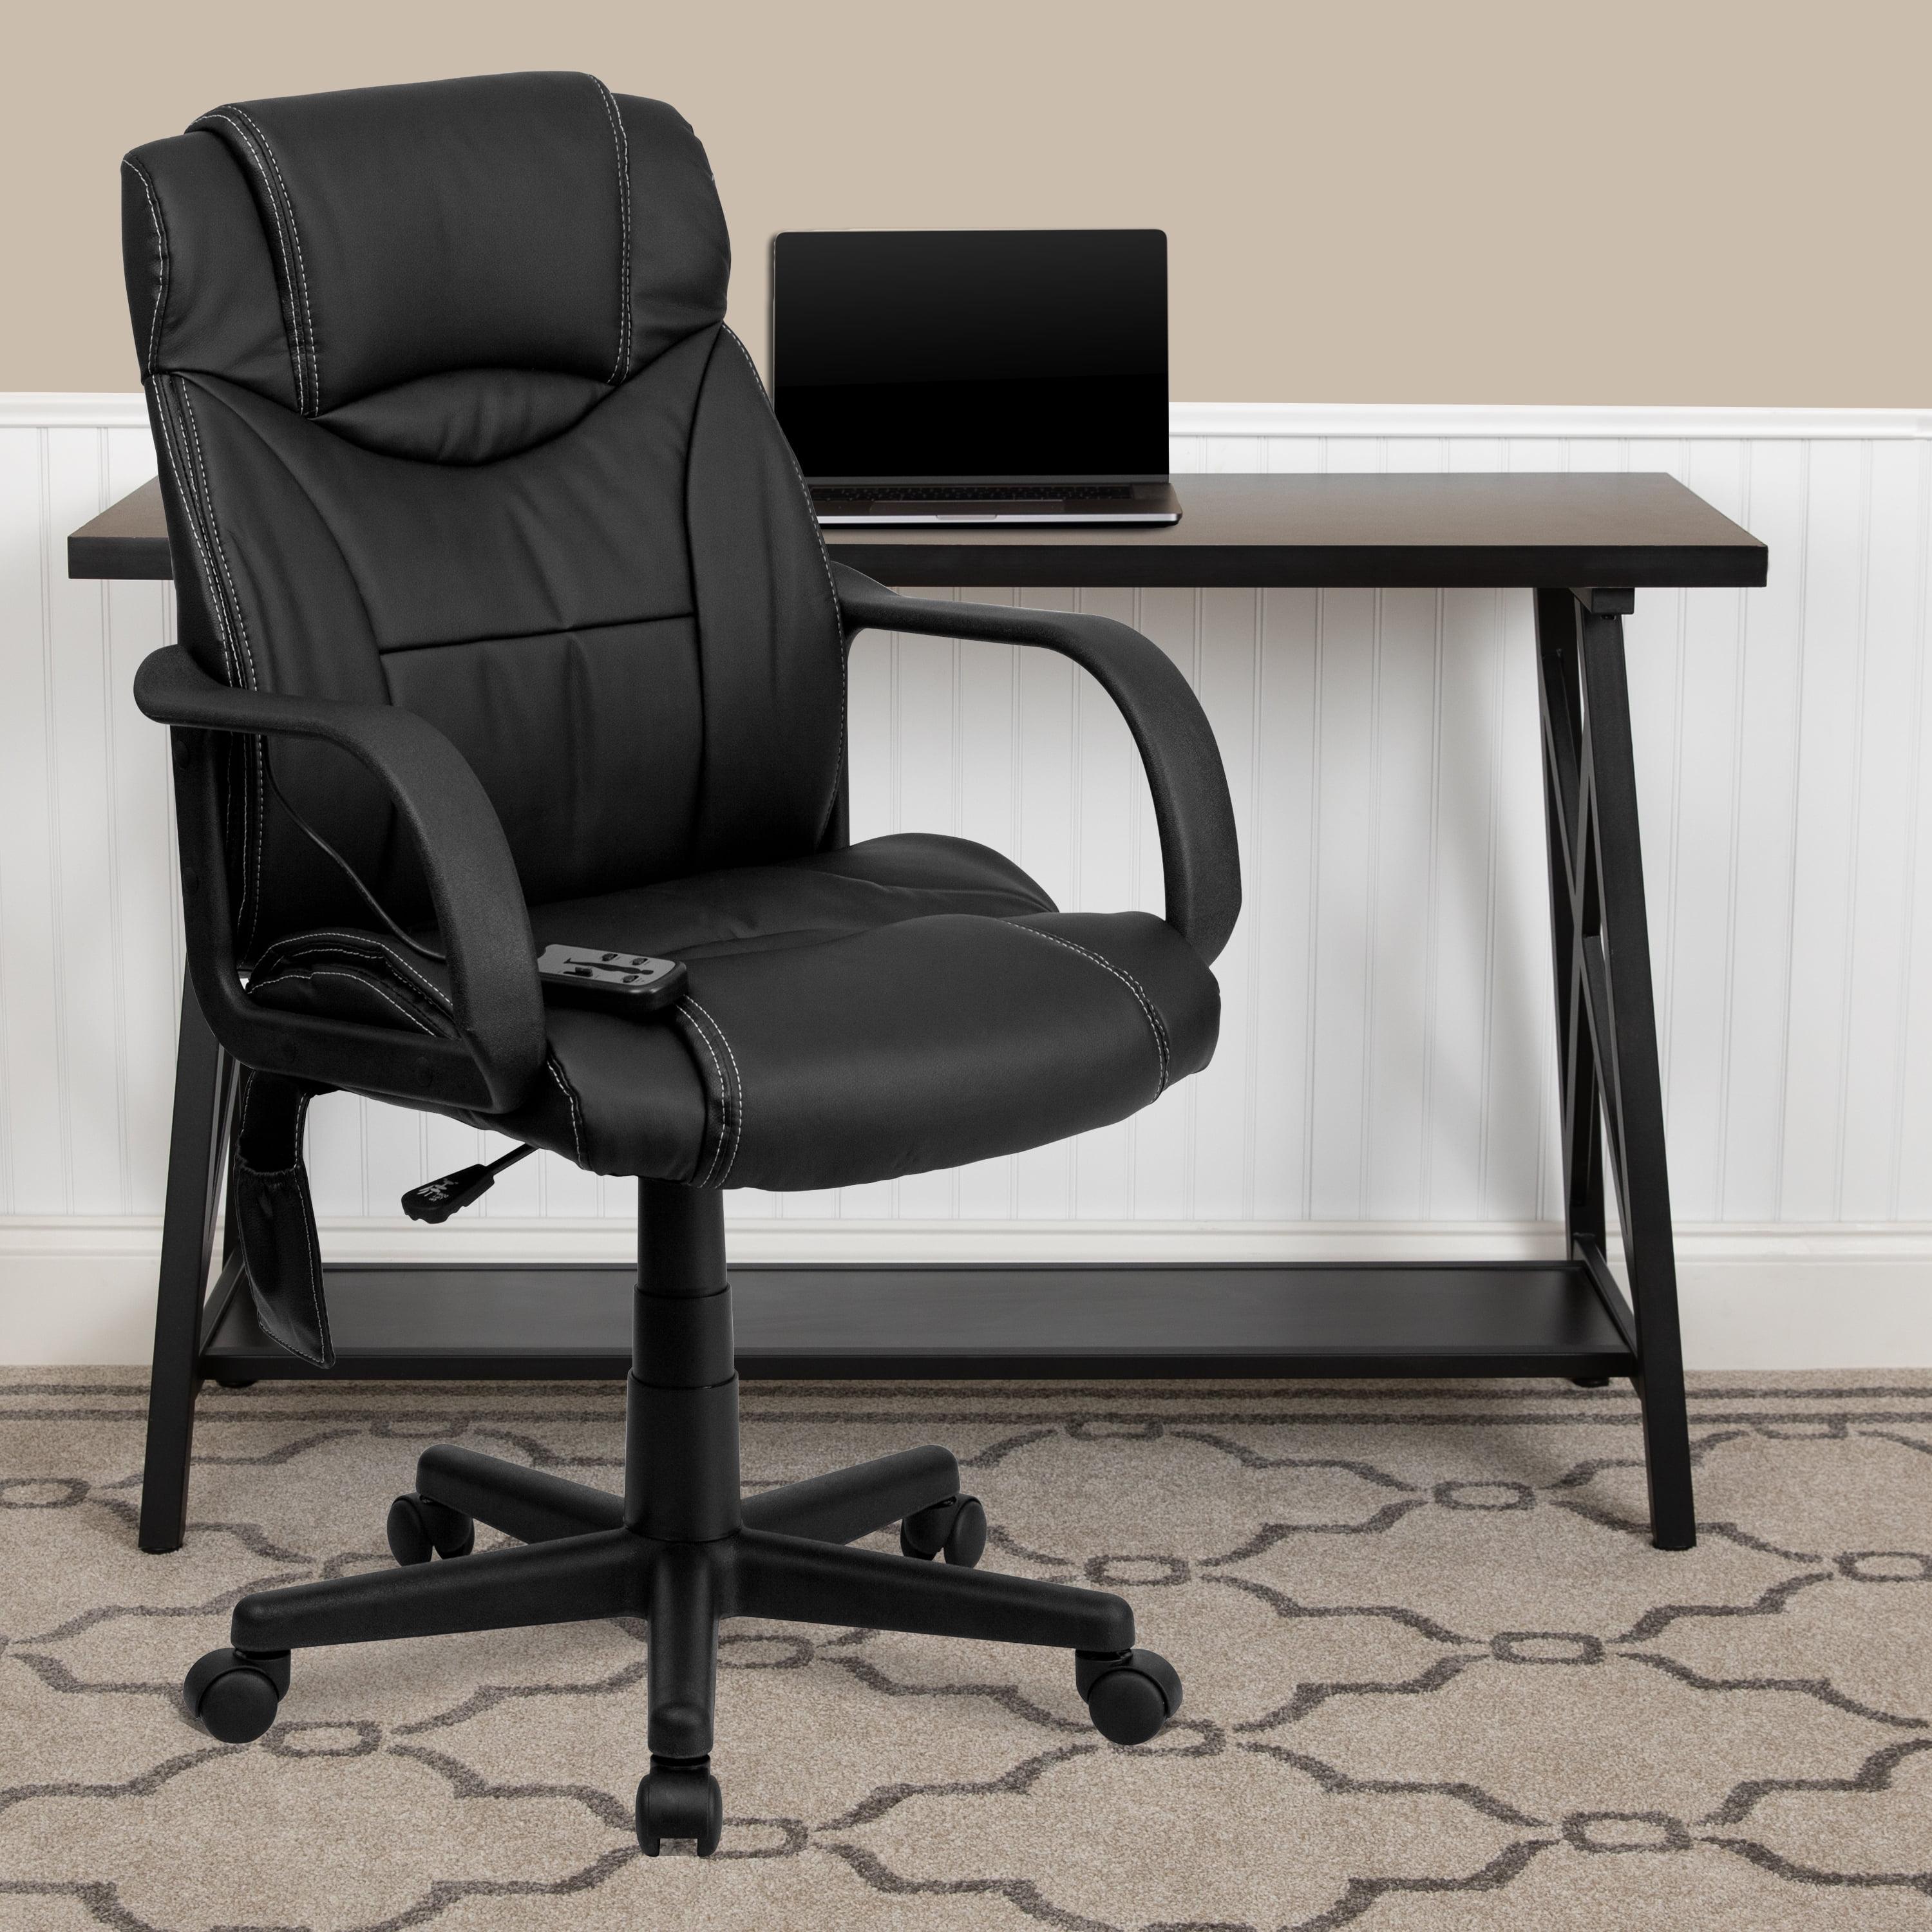 Ergonomic High-Back Black LeatherSoft Executive Swivel Chair with Massage Feature